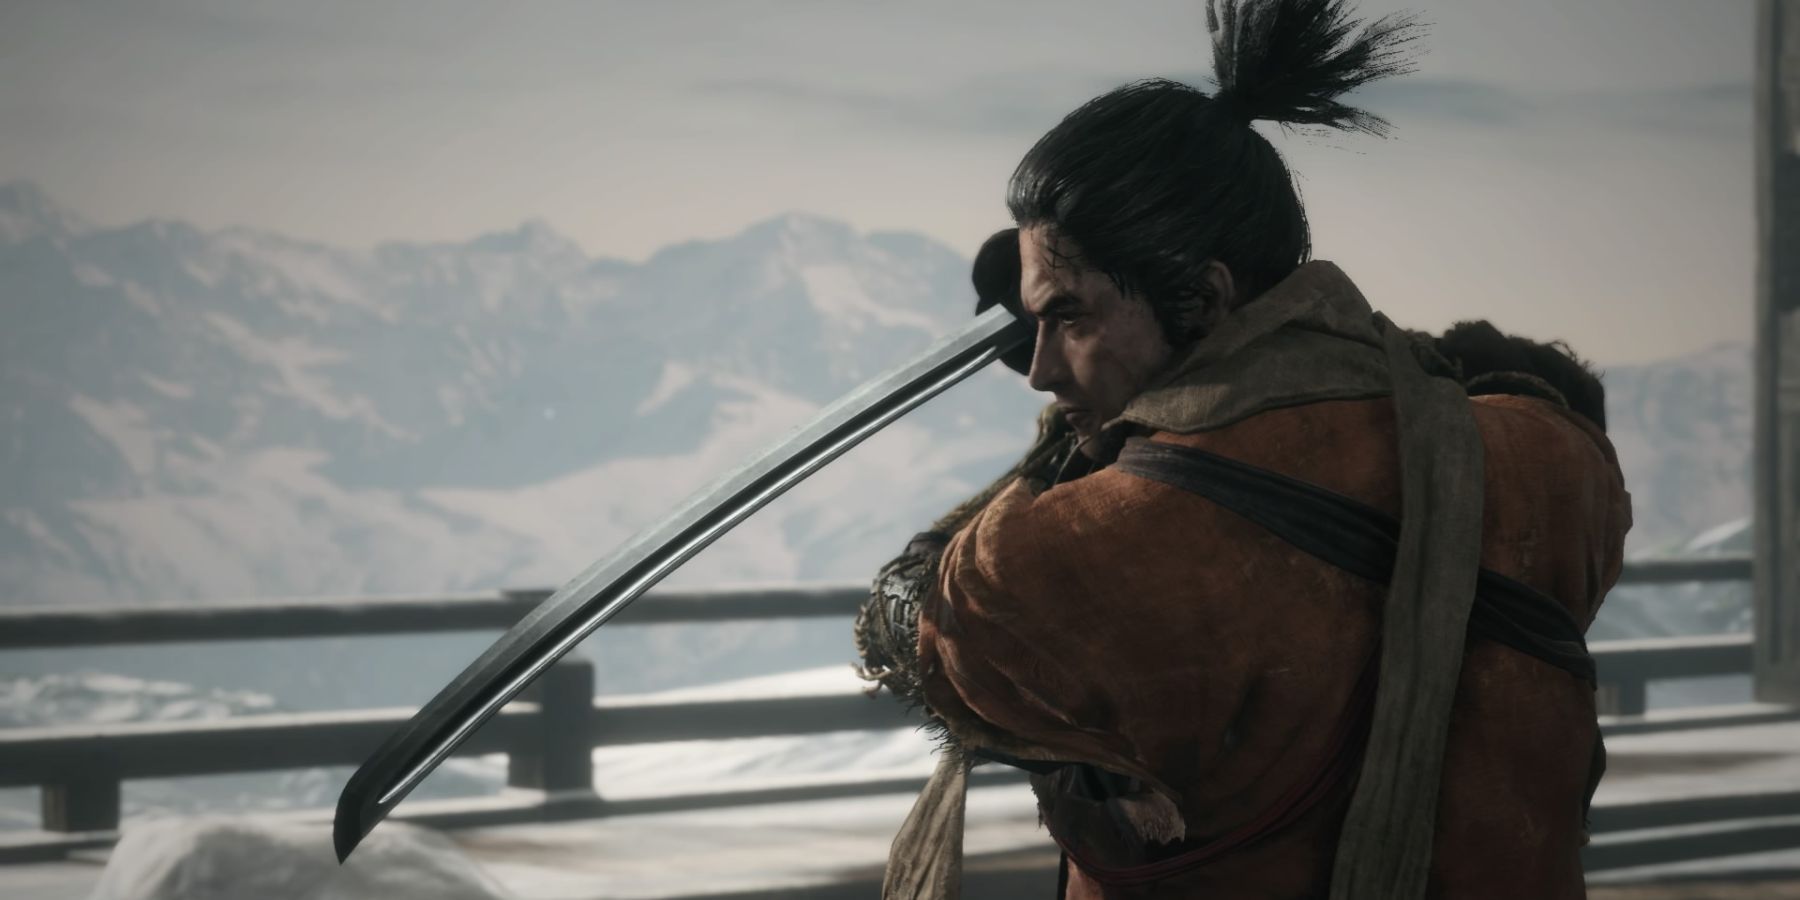 Sekiro about to fight a member of the Ashina Clan